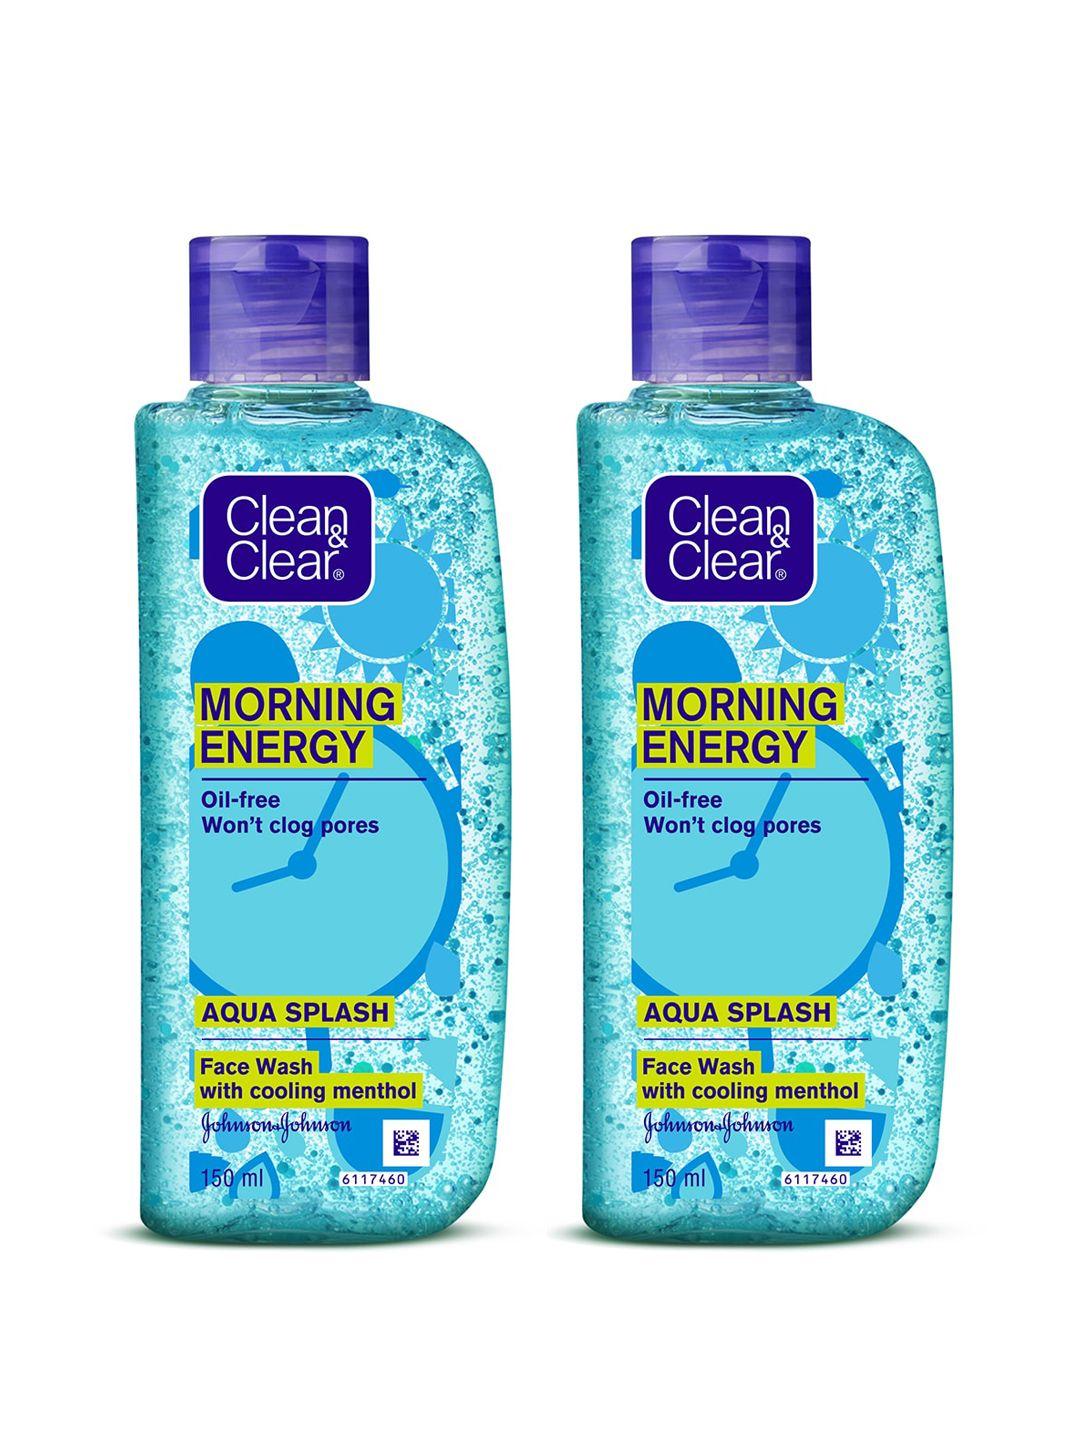 clean&clear set of 2 morning energy aqua splash face wash with cooling menthol-150 ml each